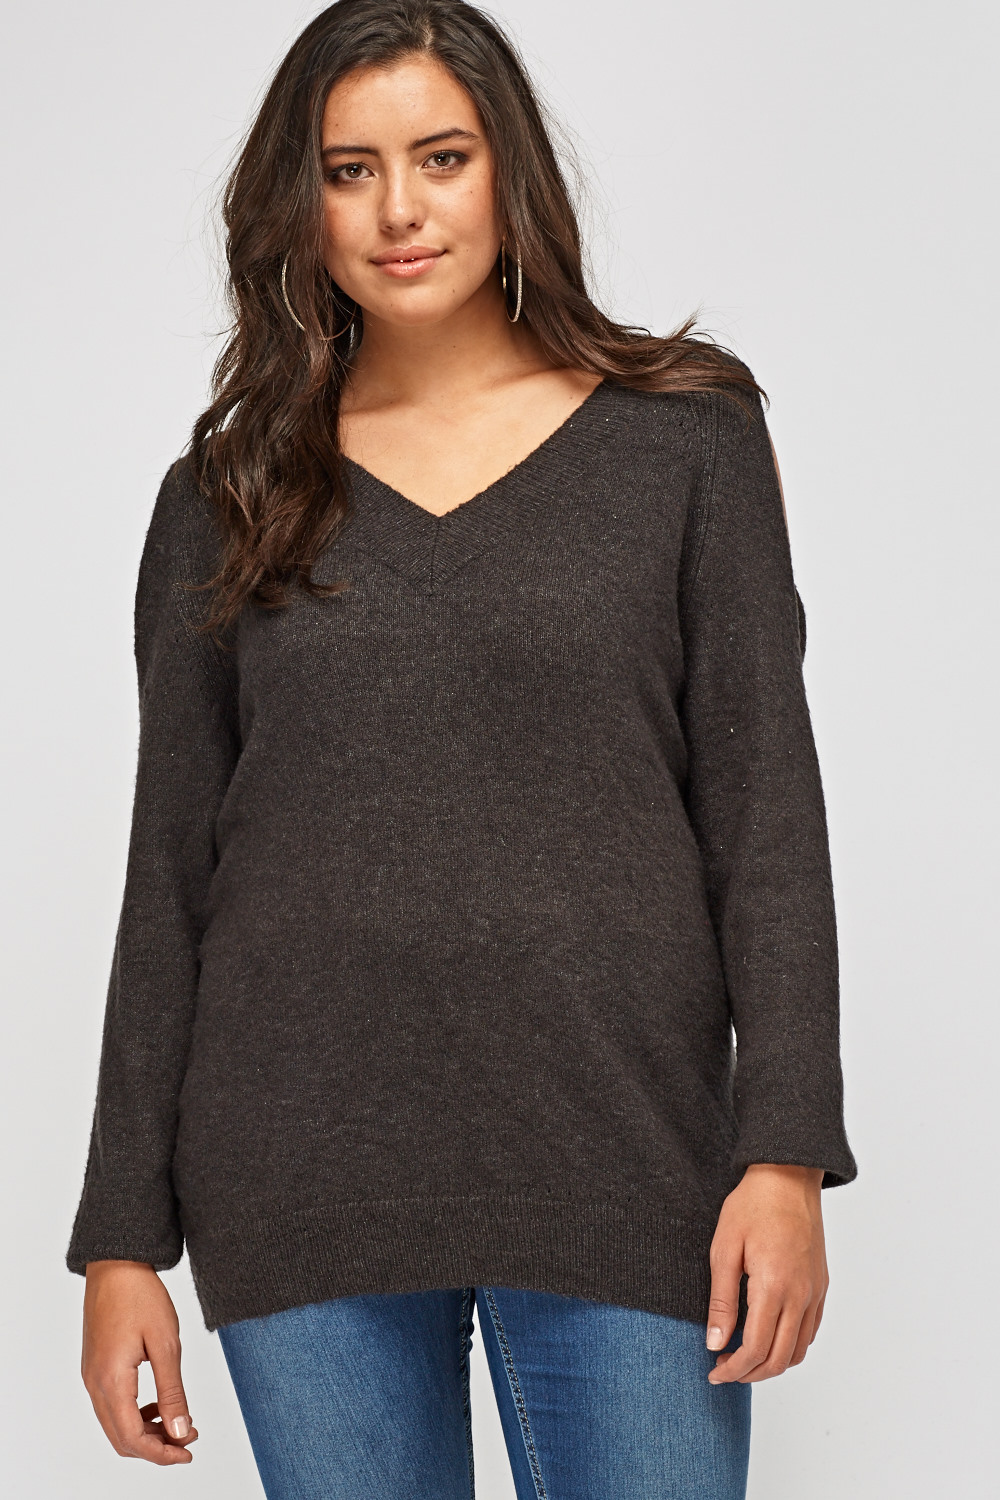 Cut Out Shoulder Knitted Casual Jumper - Just $7